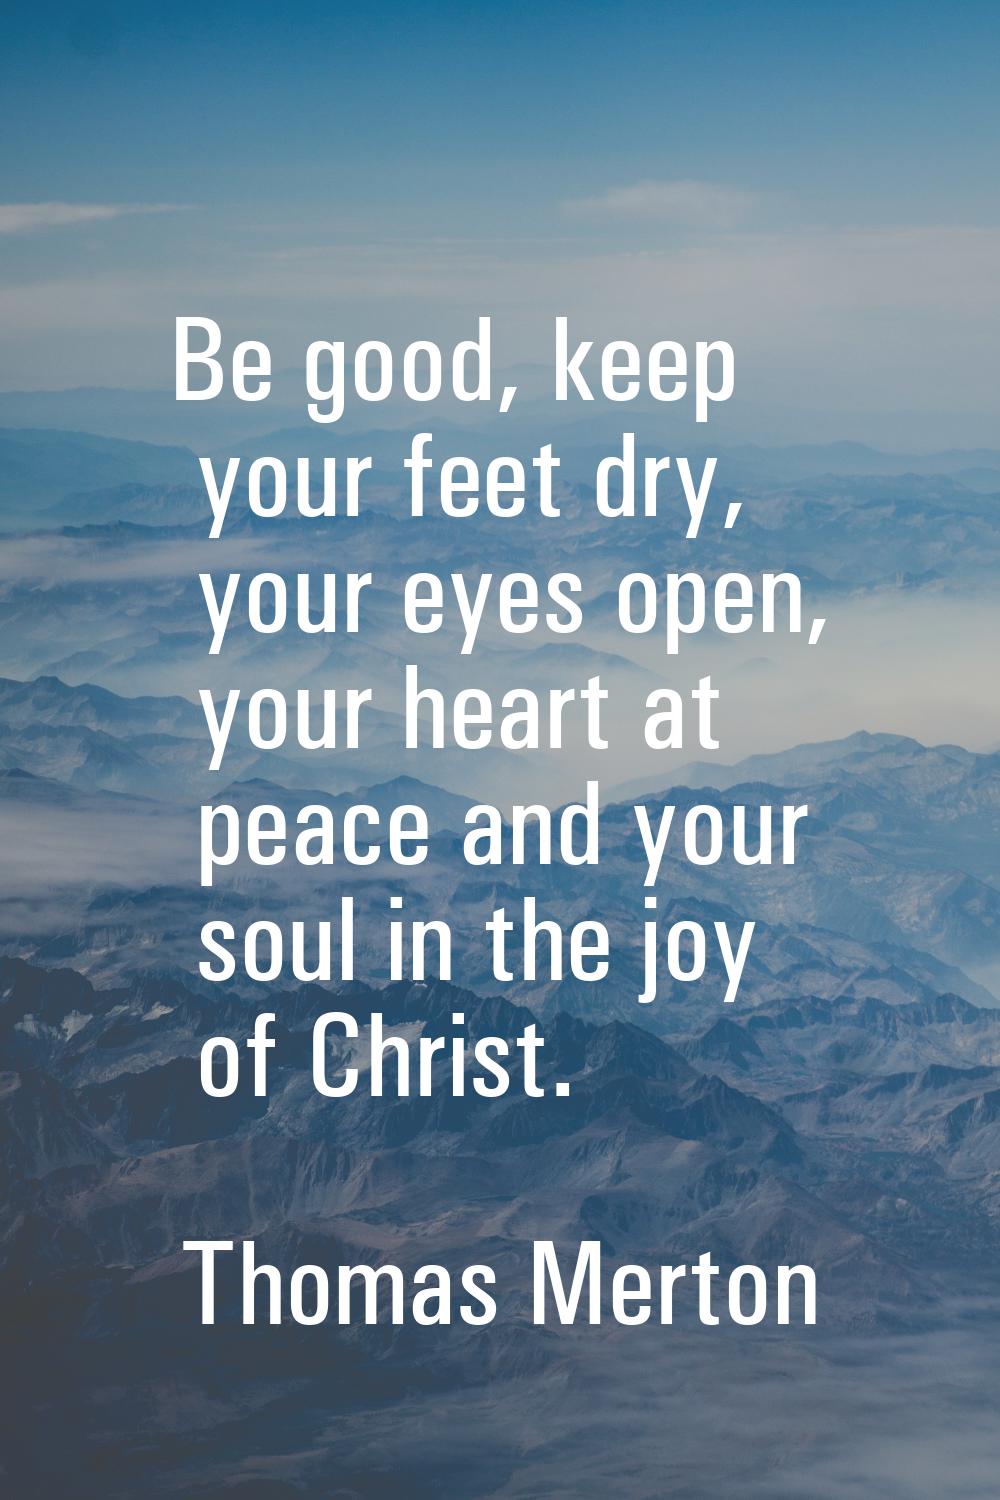 Be good, keep your feet dry, your eyes open, your heart at peace and your soul in the joy of Christ